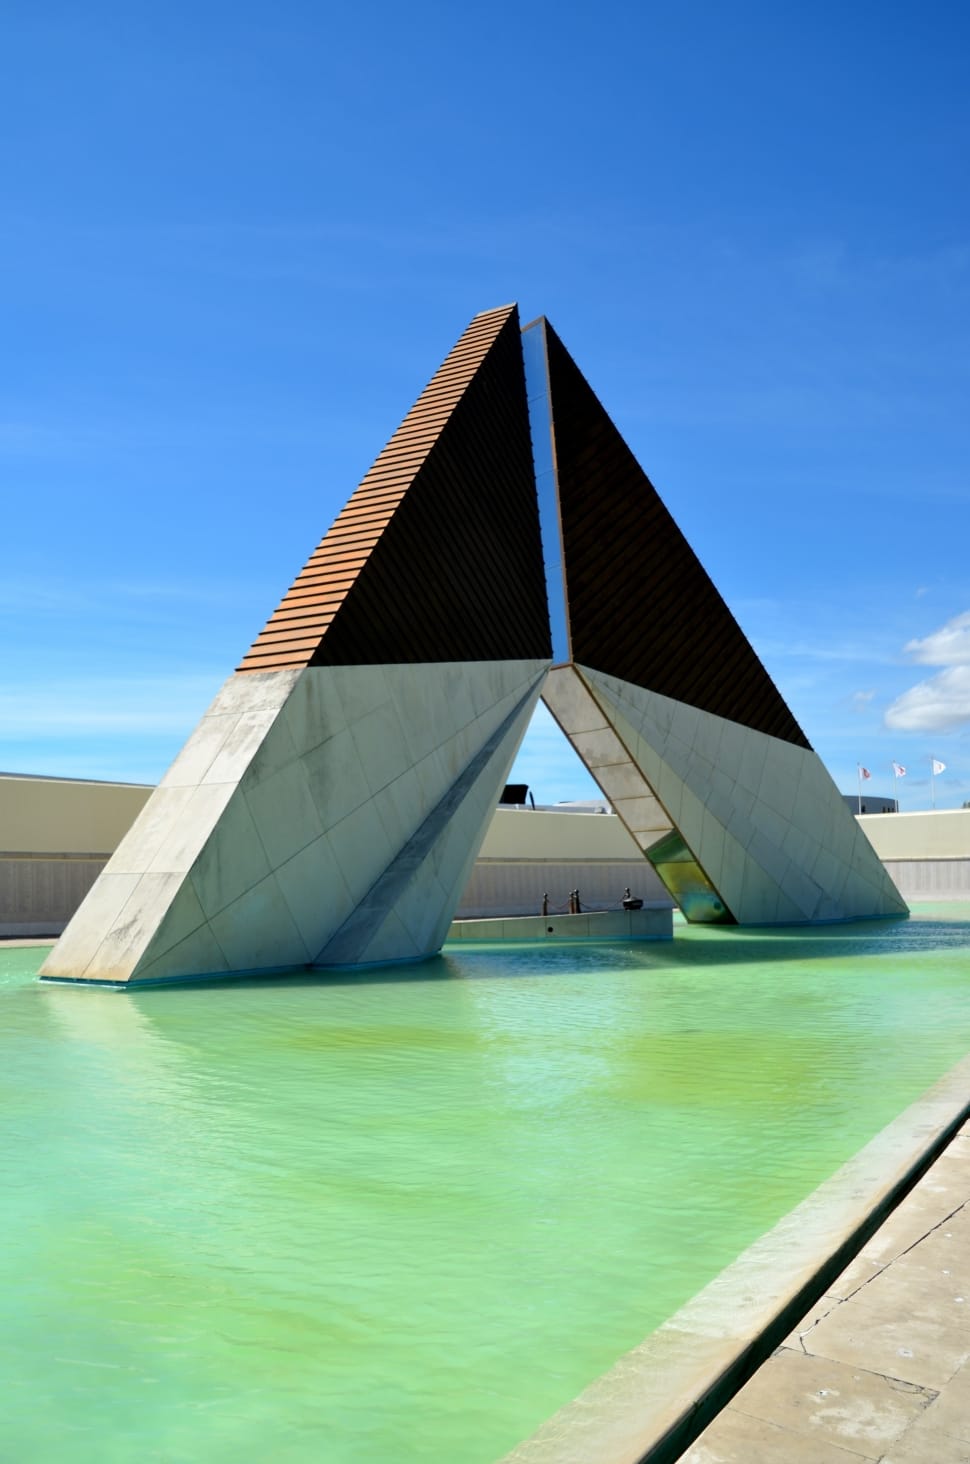 gray and brown concrete triangular shape building preview